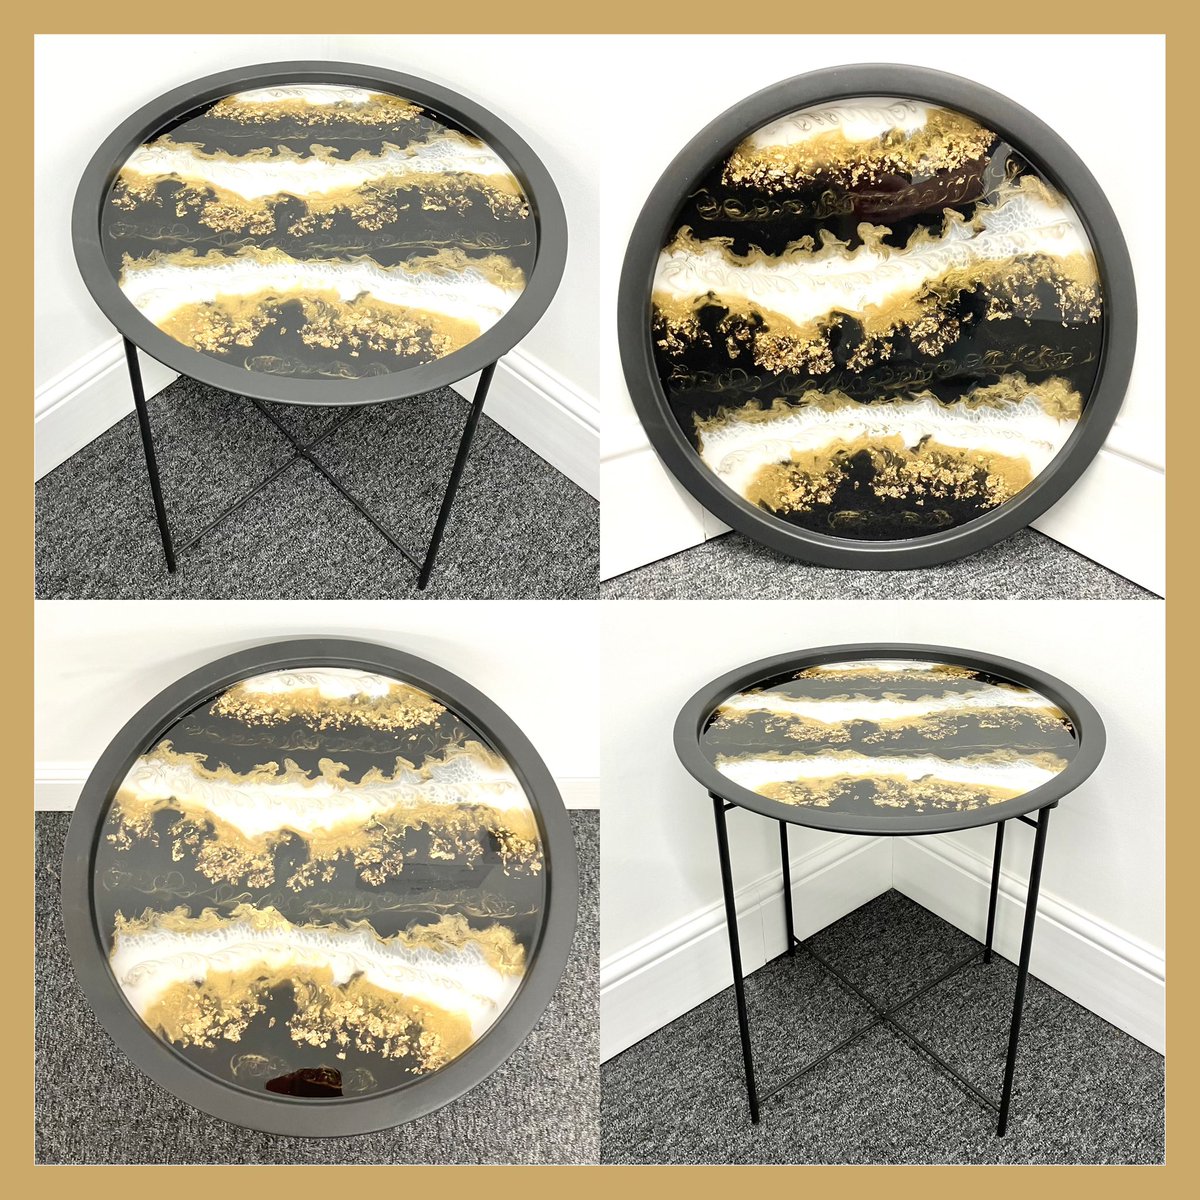 Very excited to share a brand NEW resin tray table, in a geode black, white & gold design, with added gold foil. It comes flat packed & can be used as a table & tray: muresindesigns.etsy.com/listing/172954… #UKGiftHour #ukgiftam #shopindie #smartsocial #CraftBizParty #giftidea #etsyfinds